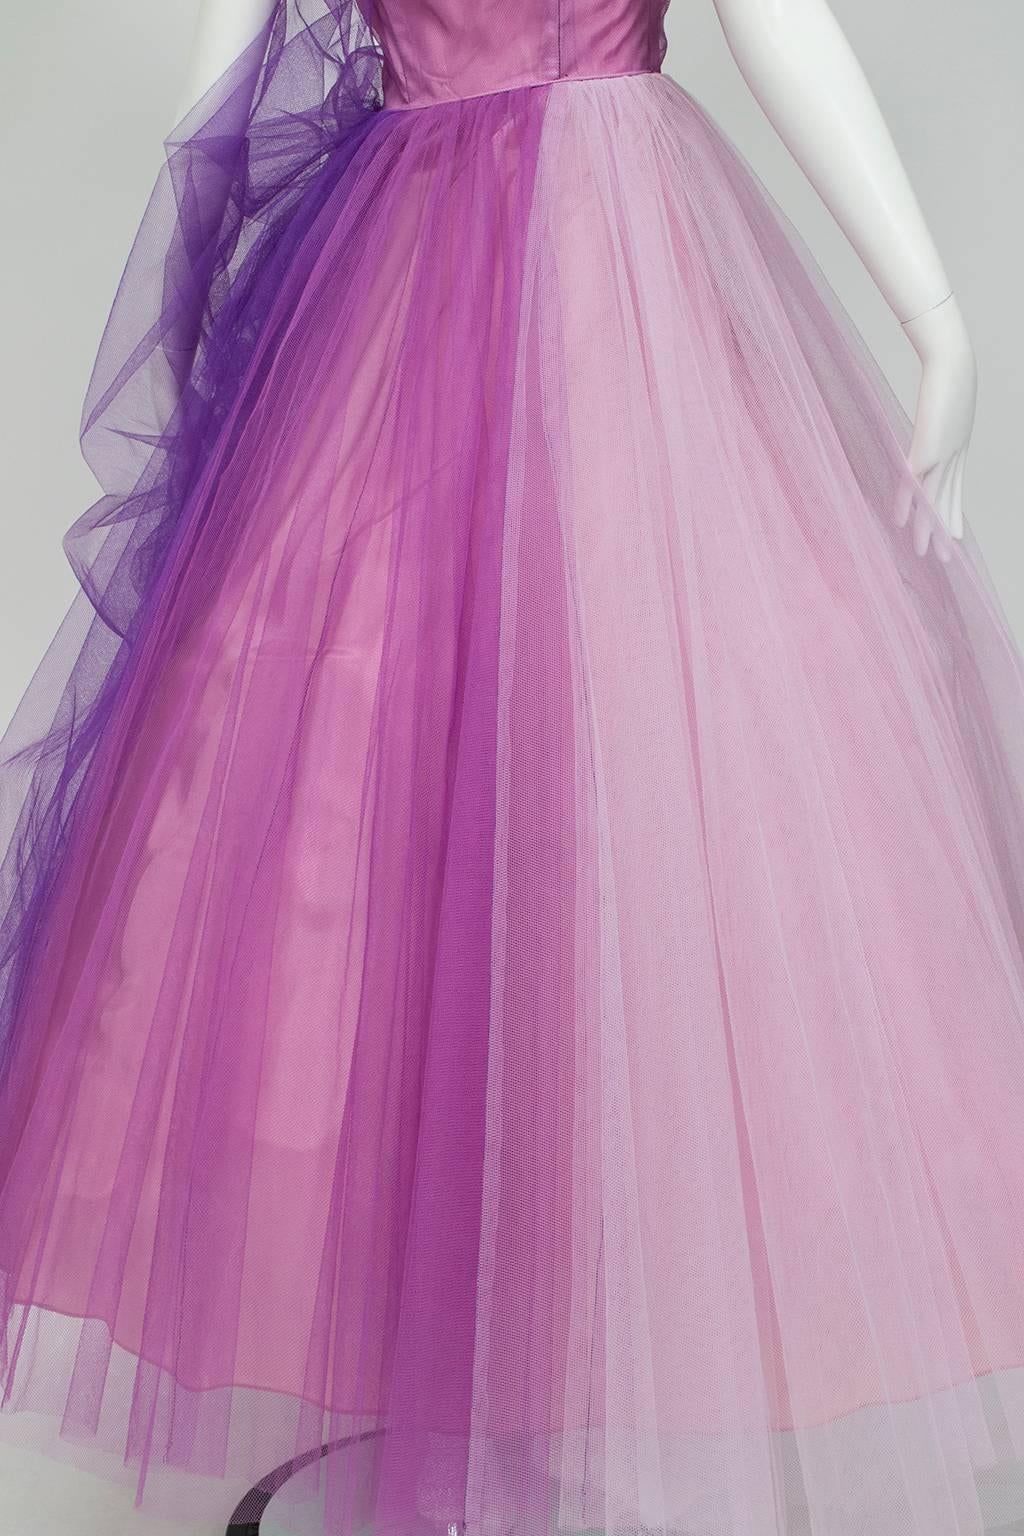 Emma Domb Violet Ombré Strapless Ball Gown, 1950s 5